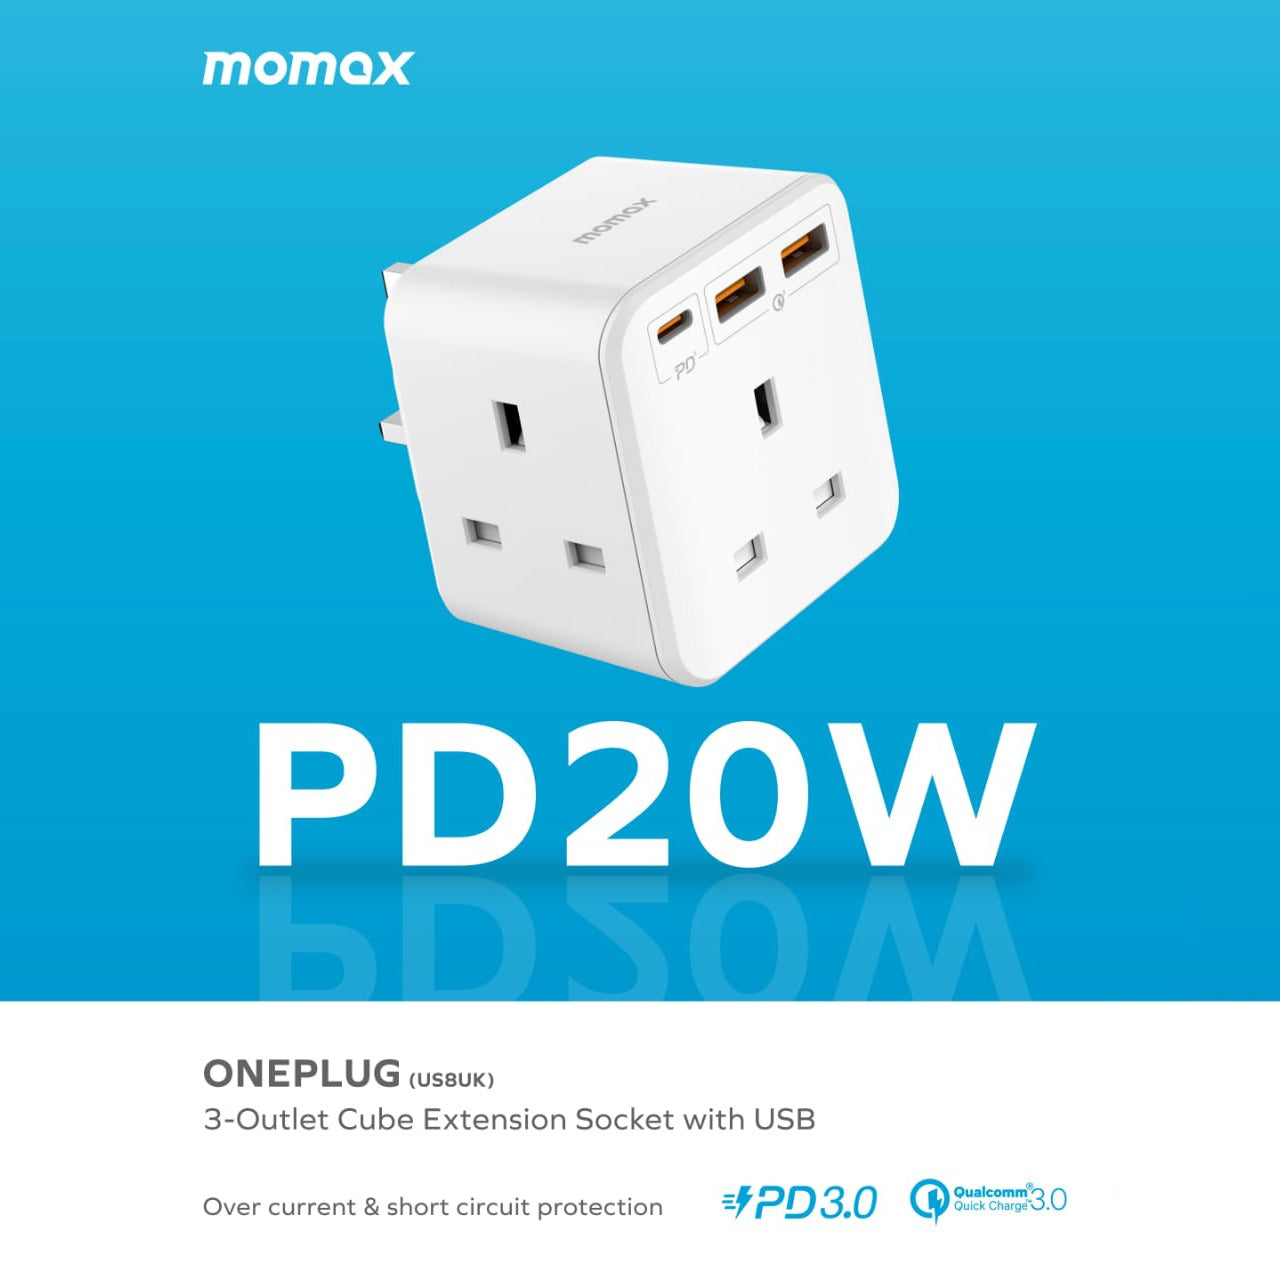 Oneplug 3-Outlet Cube Extension